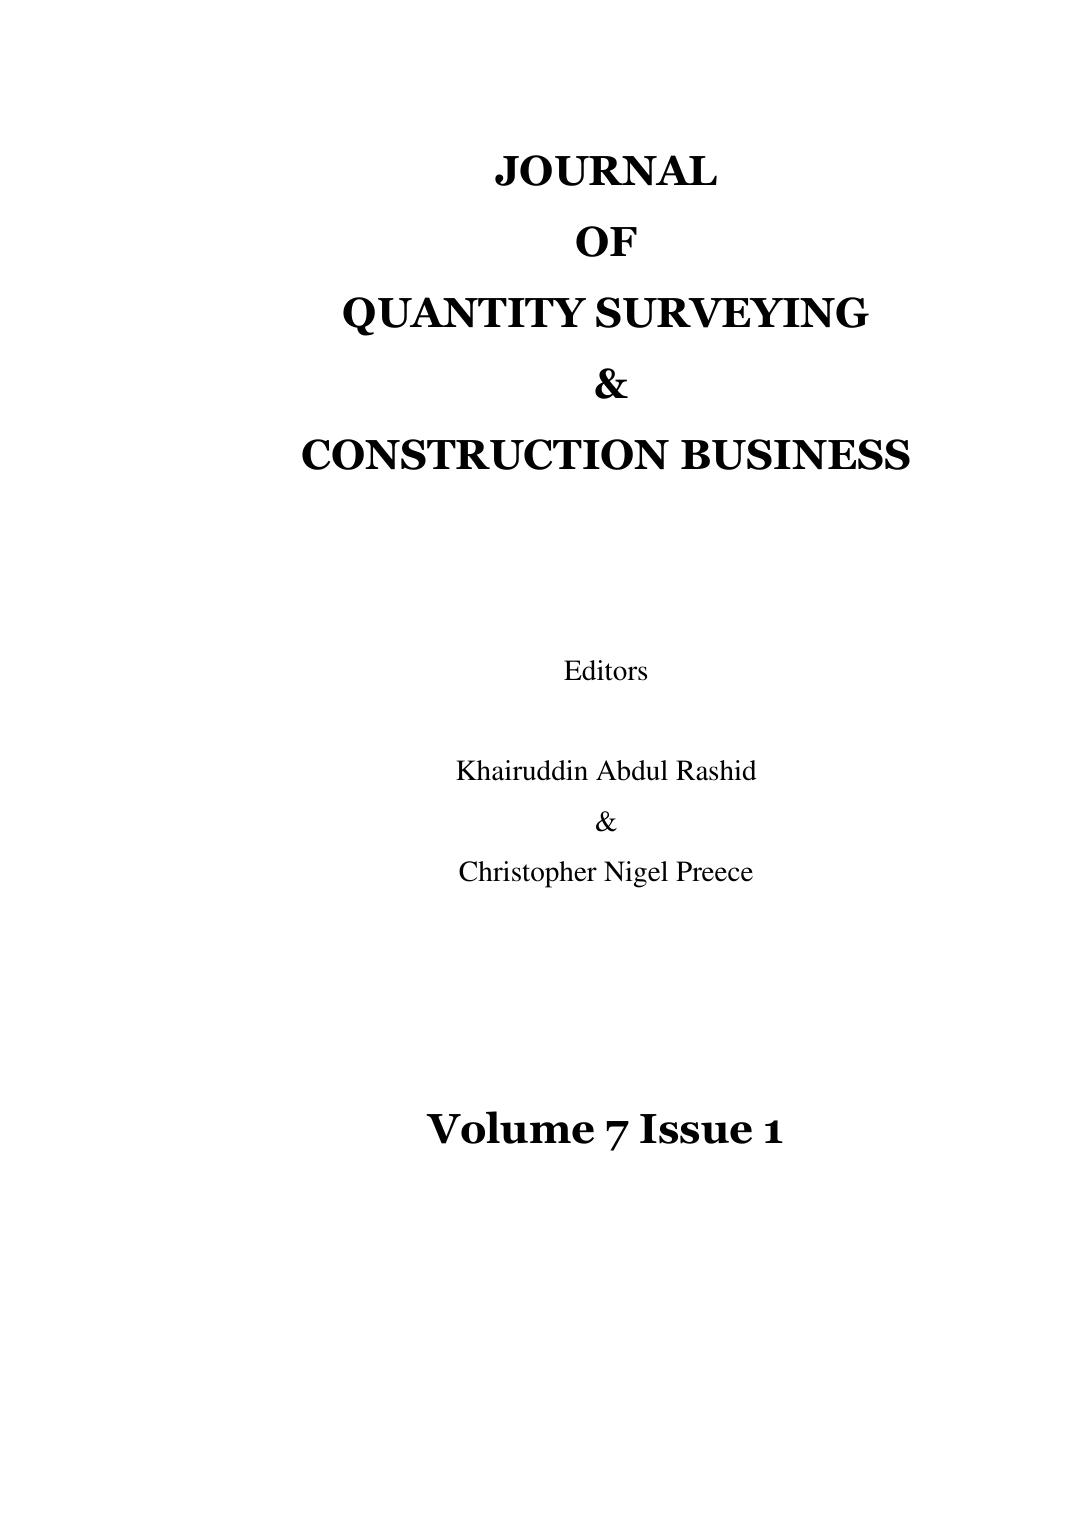 journal of quantity surveying & construction business  2017